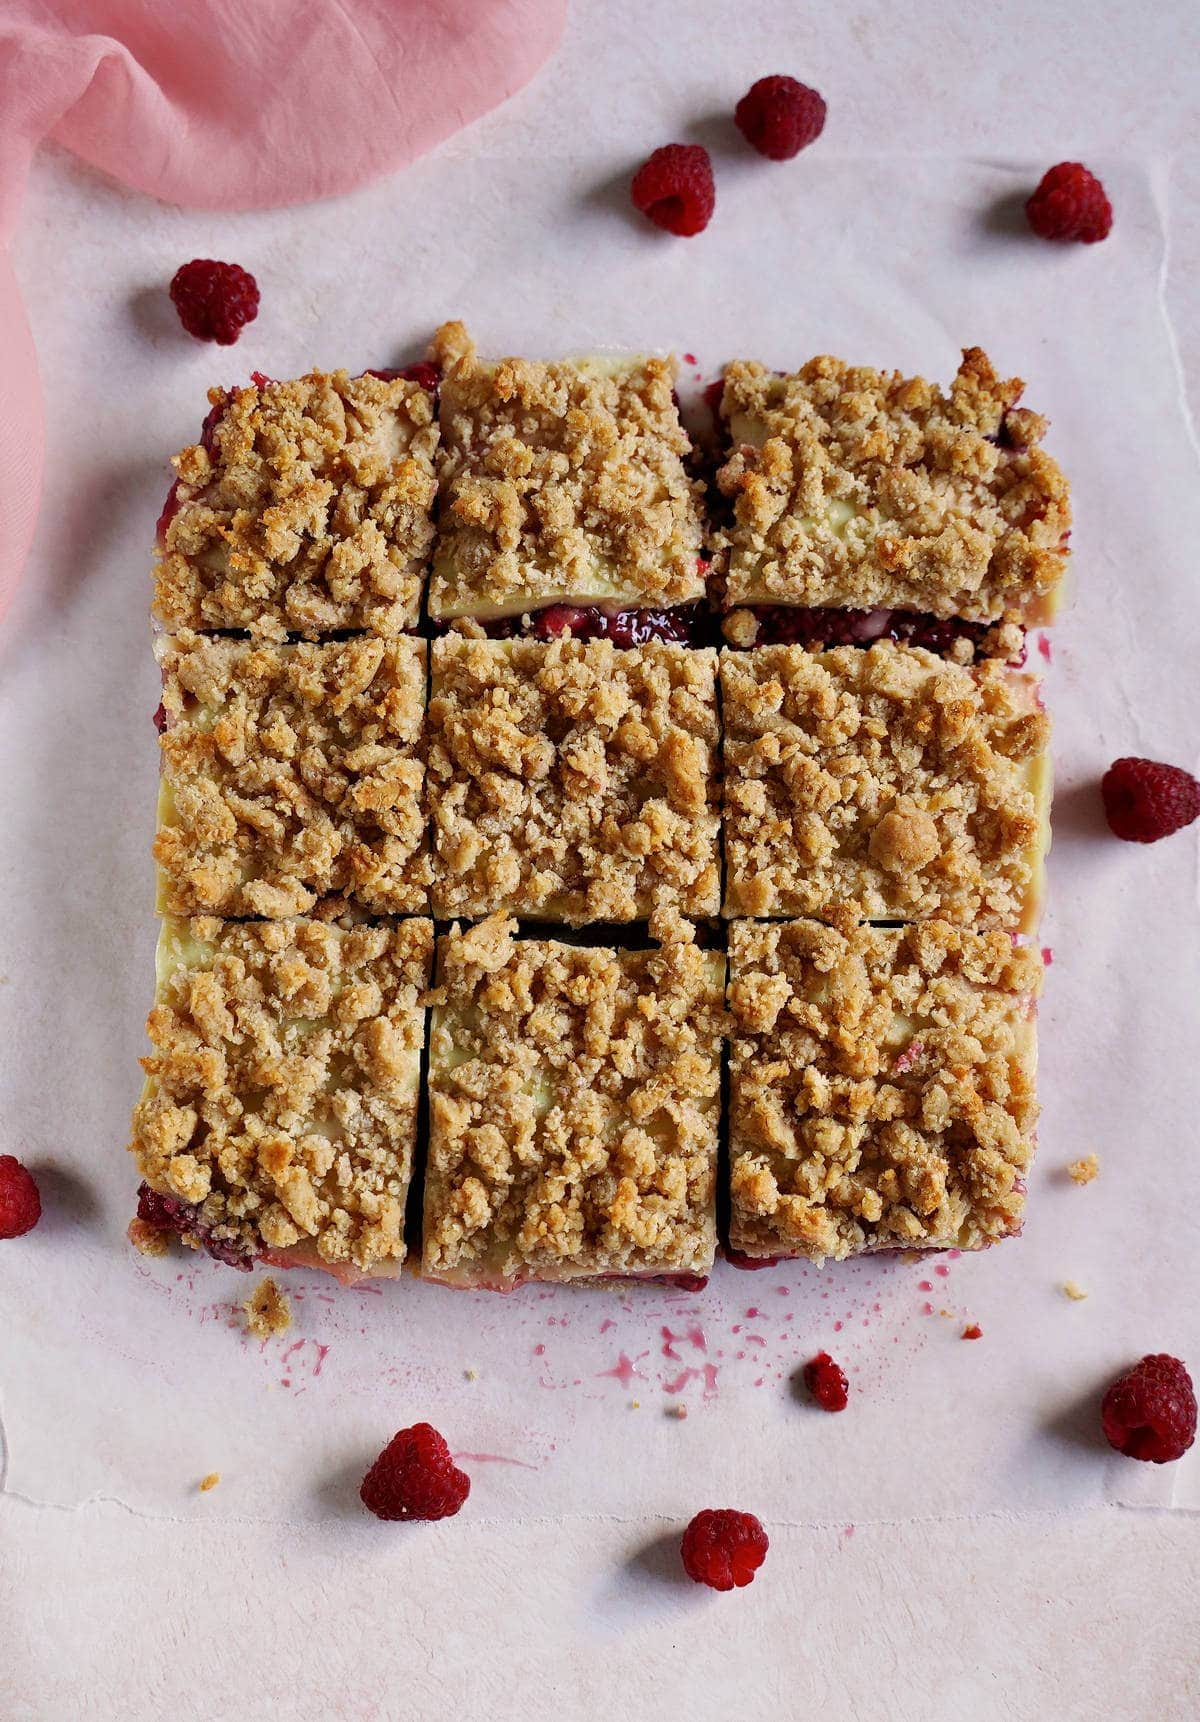 9 slices of crumble cake with raspberries